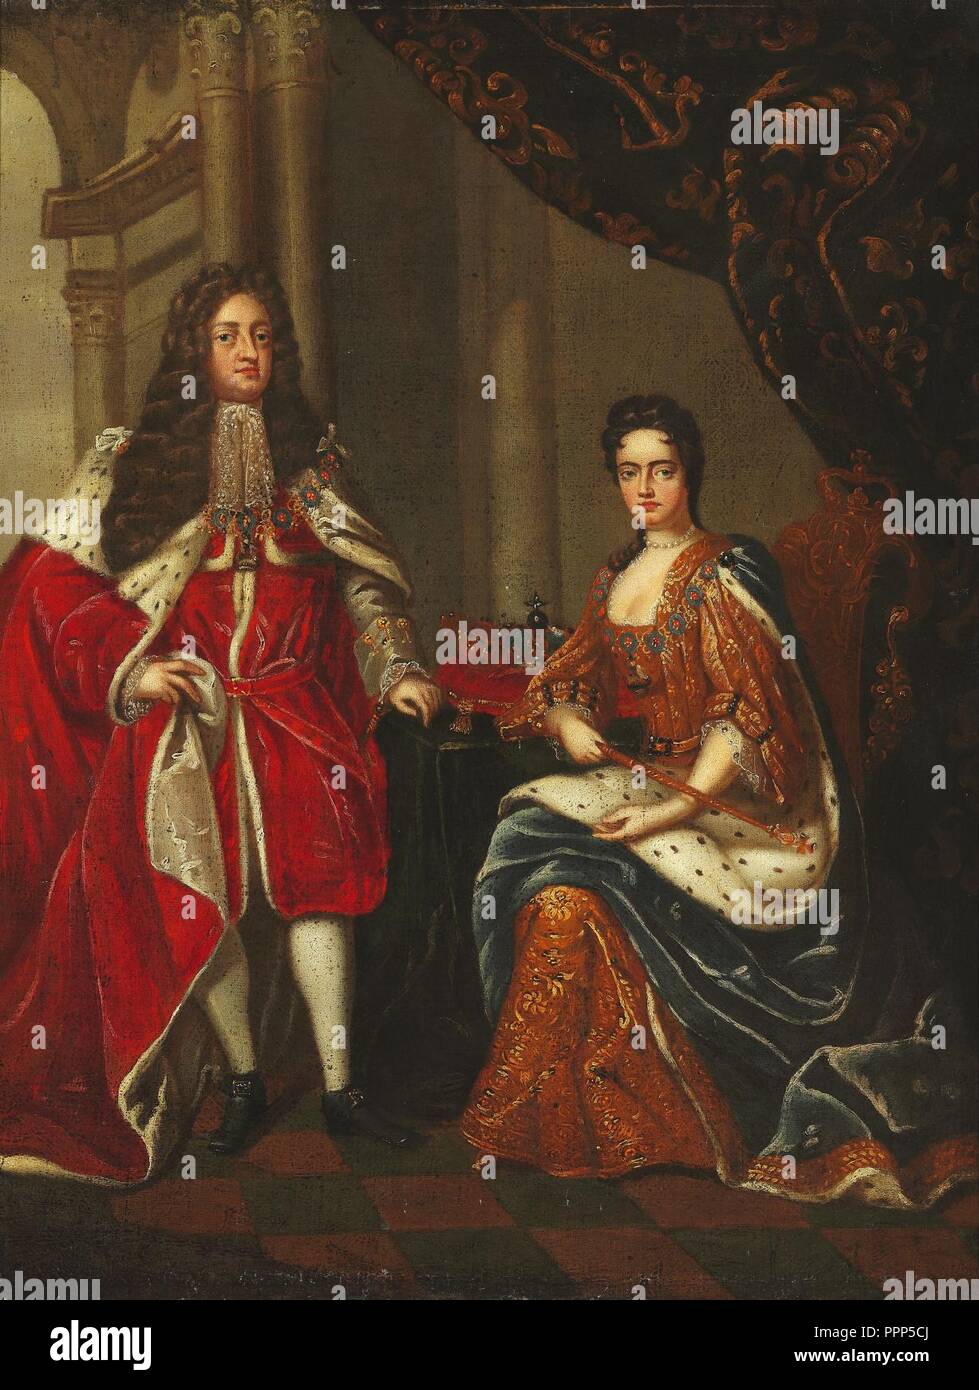 GREAT BRITAIN Glossy 8x10 Photo Scotland Poster Ireland QUEEN OF ENGLAND ANNE 